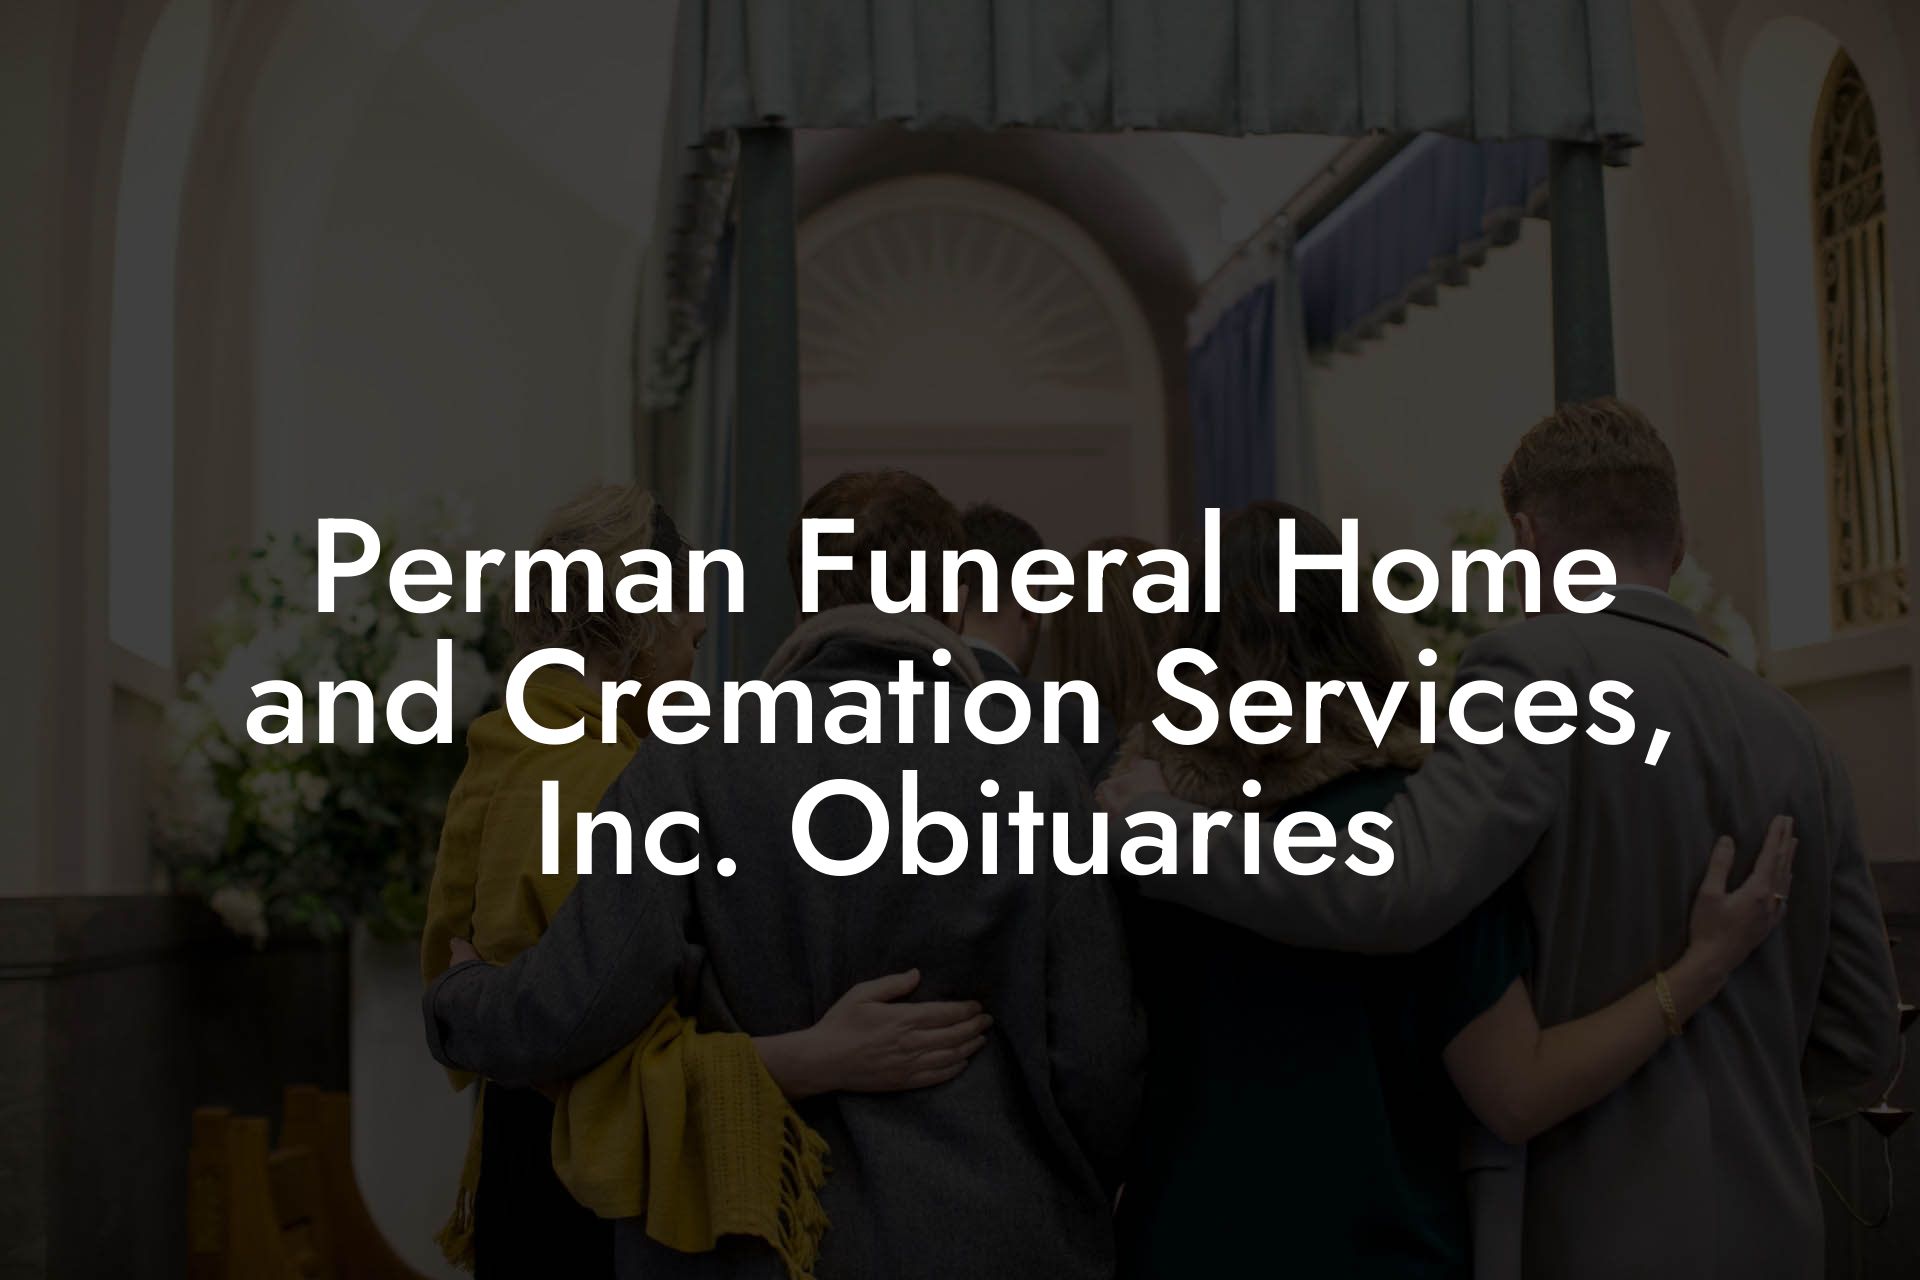 Perman Funeral Home and Cremation Services, Inc. Obituaries